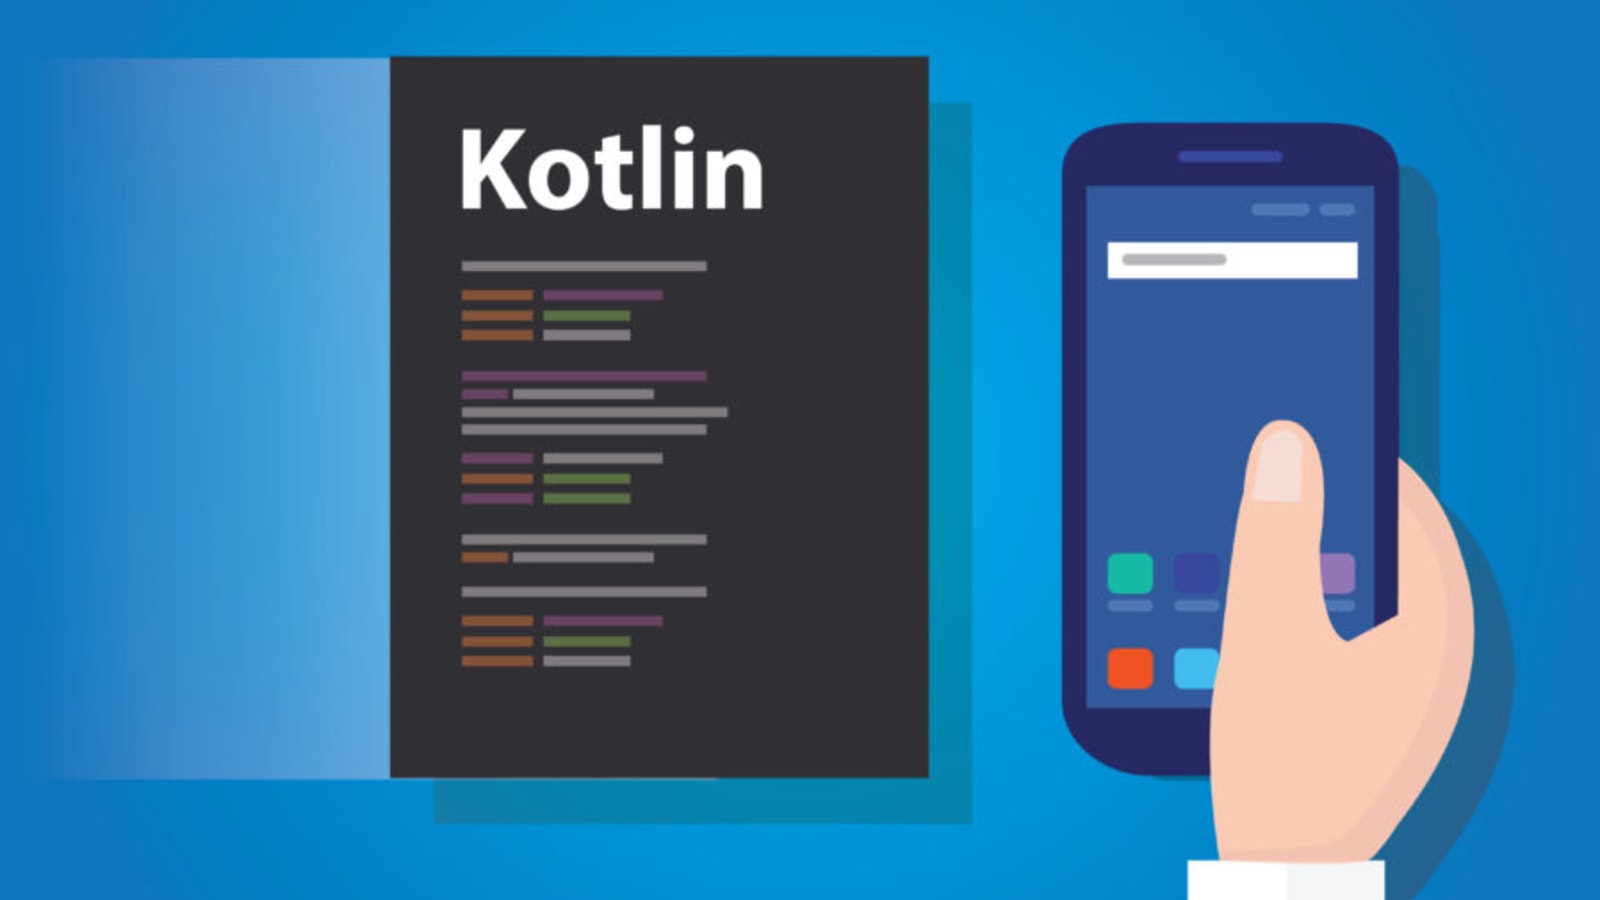 learning kotlin for android